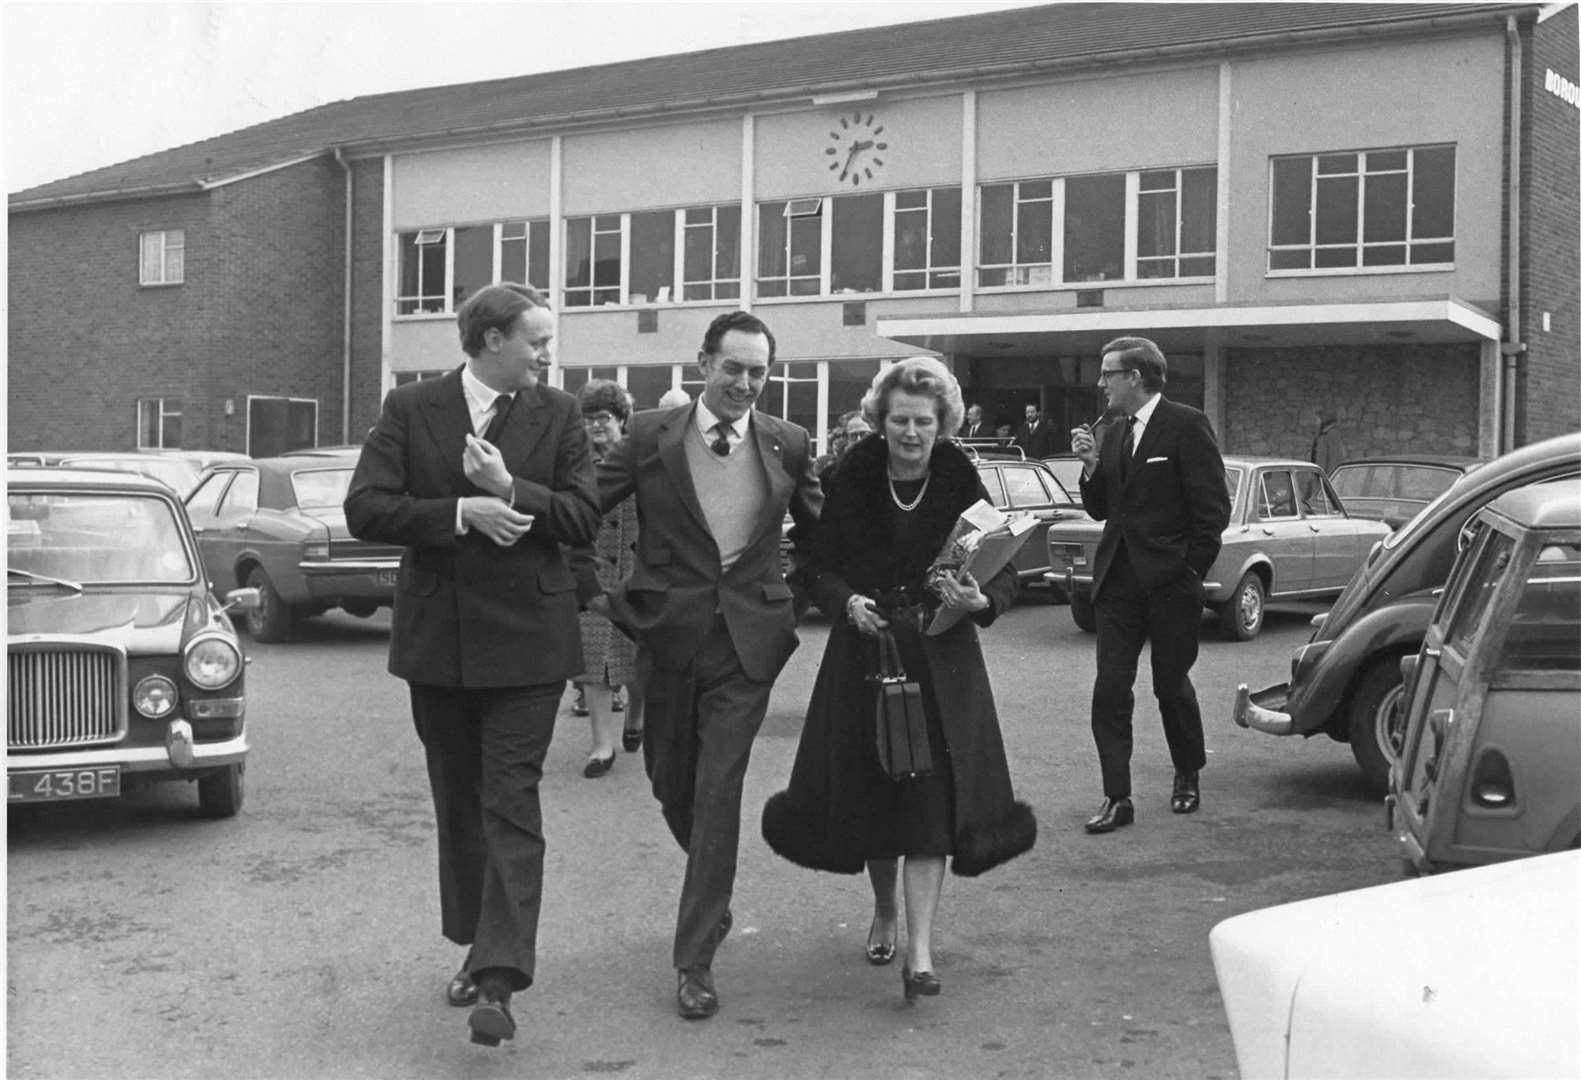 Education Secretary Margaret Thatcher walks from the village hall in Borough Green talking to Conservative candidate John Stanley (left) after attending the Tonbridge and Malling Tories Women's Advisory Committee in 1973. Mr Stanley won the Tonbridge and Malling seat at the General Election in February 1974. However the overall result was a hung parliament, which eventually led to Mrs Thatcher becoming Tory leader